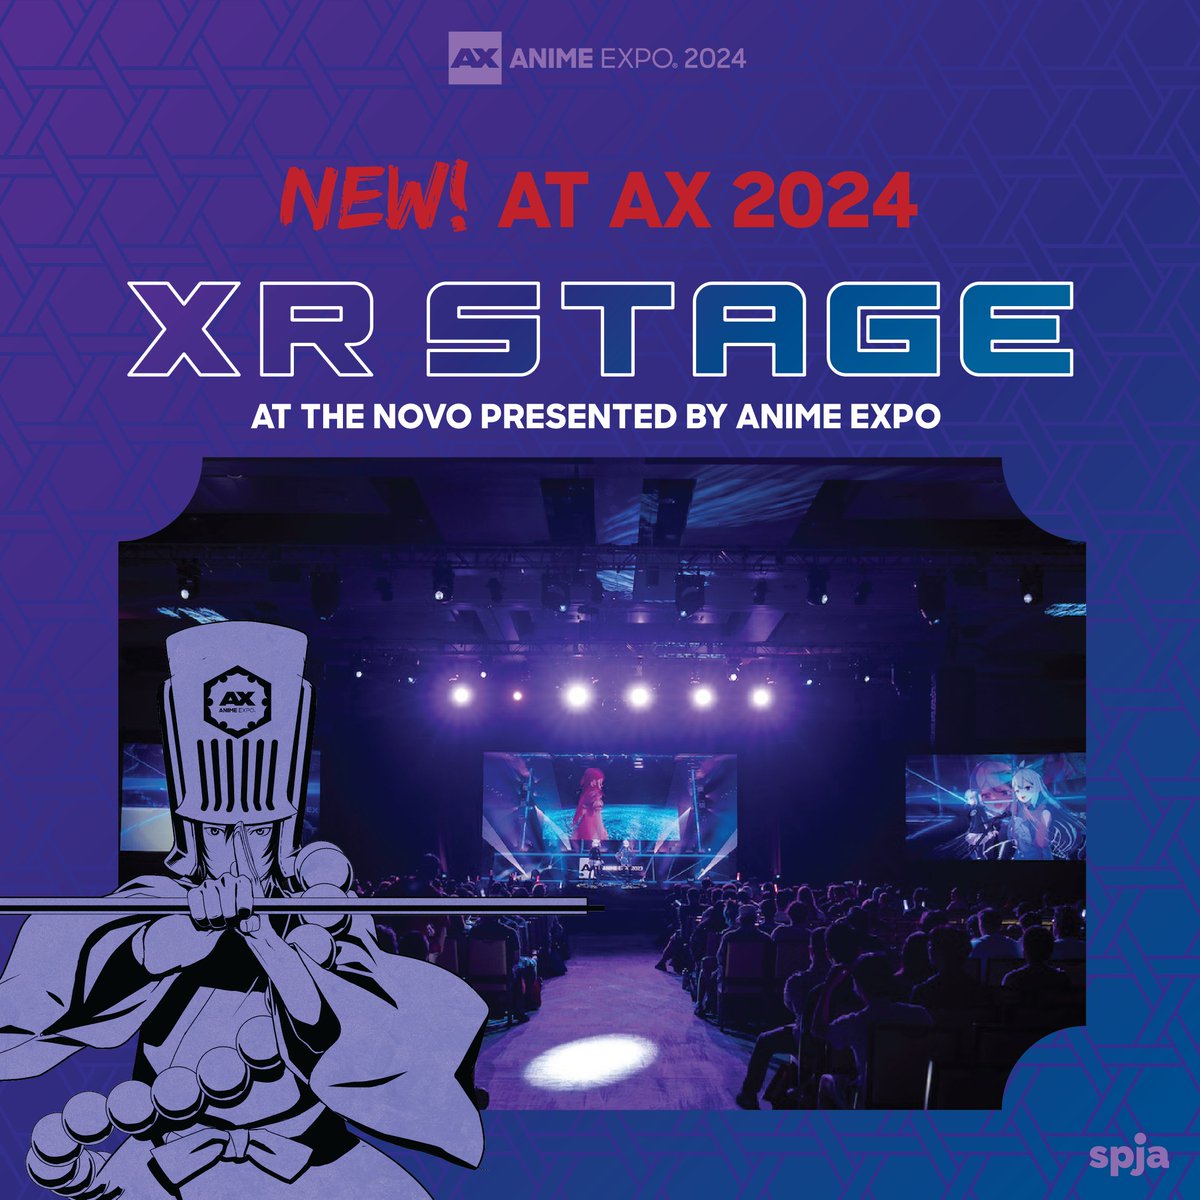 𝙉𝙀𝙒! at #AX2024 💥 XR Stage (Extended Reality Stage) at the Novo presented by Anime Expo Get ready to experience a revolutionary stage that combines digital Augmented, Virtual, and Mixed Reality. 😎 Concerts to be announced soon! 🎟️ Buy Your Badge Now! bit.ly/4bcTcYQ